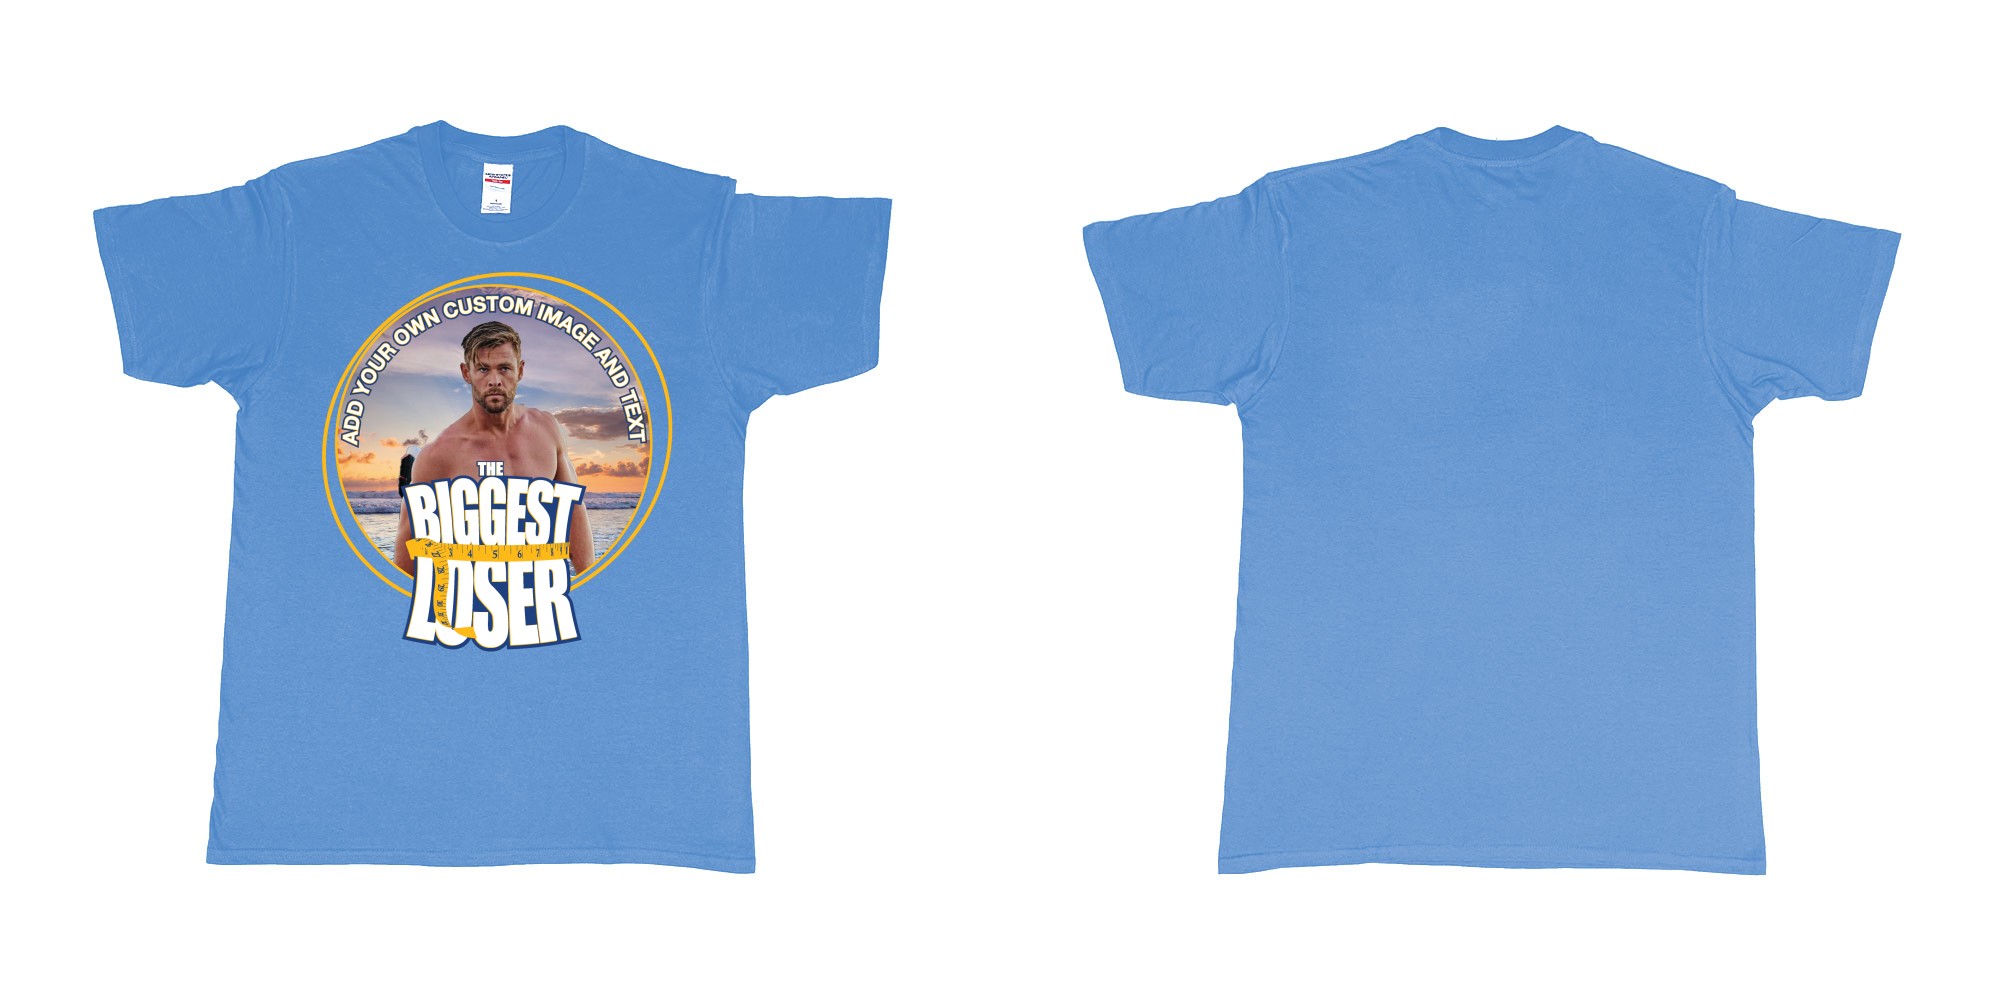 Custom tshirt design the biggest loser logo custom image funny tshirt design in fabric color carolina-blue choice your own text made in Bali by The Pirate Way